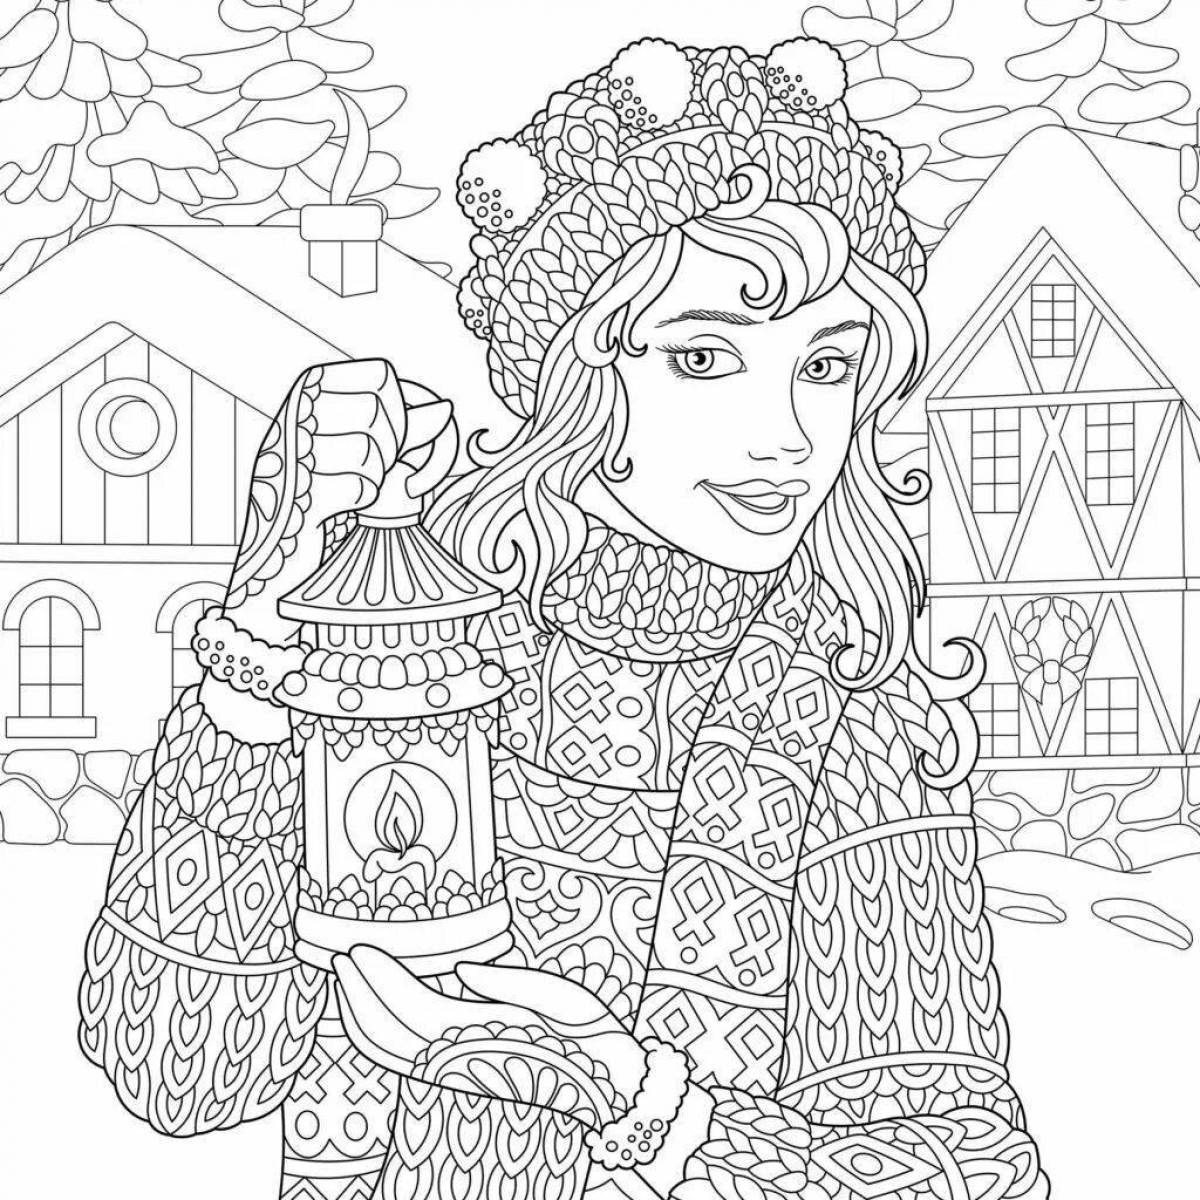 Invigorating Christmas coloring book for adults